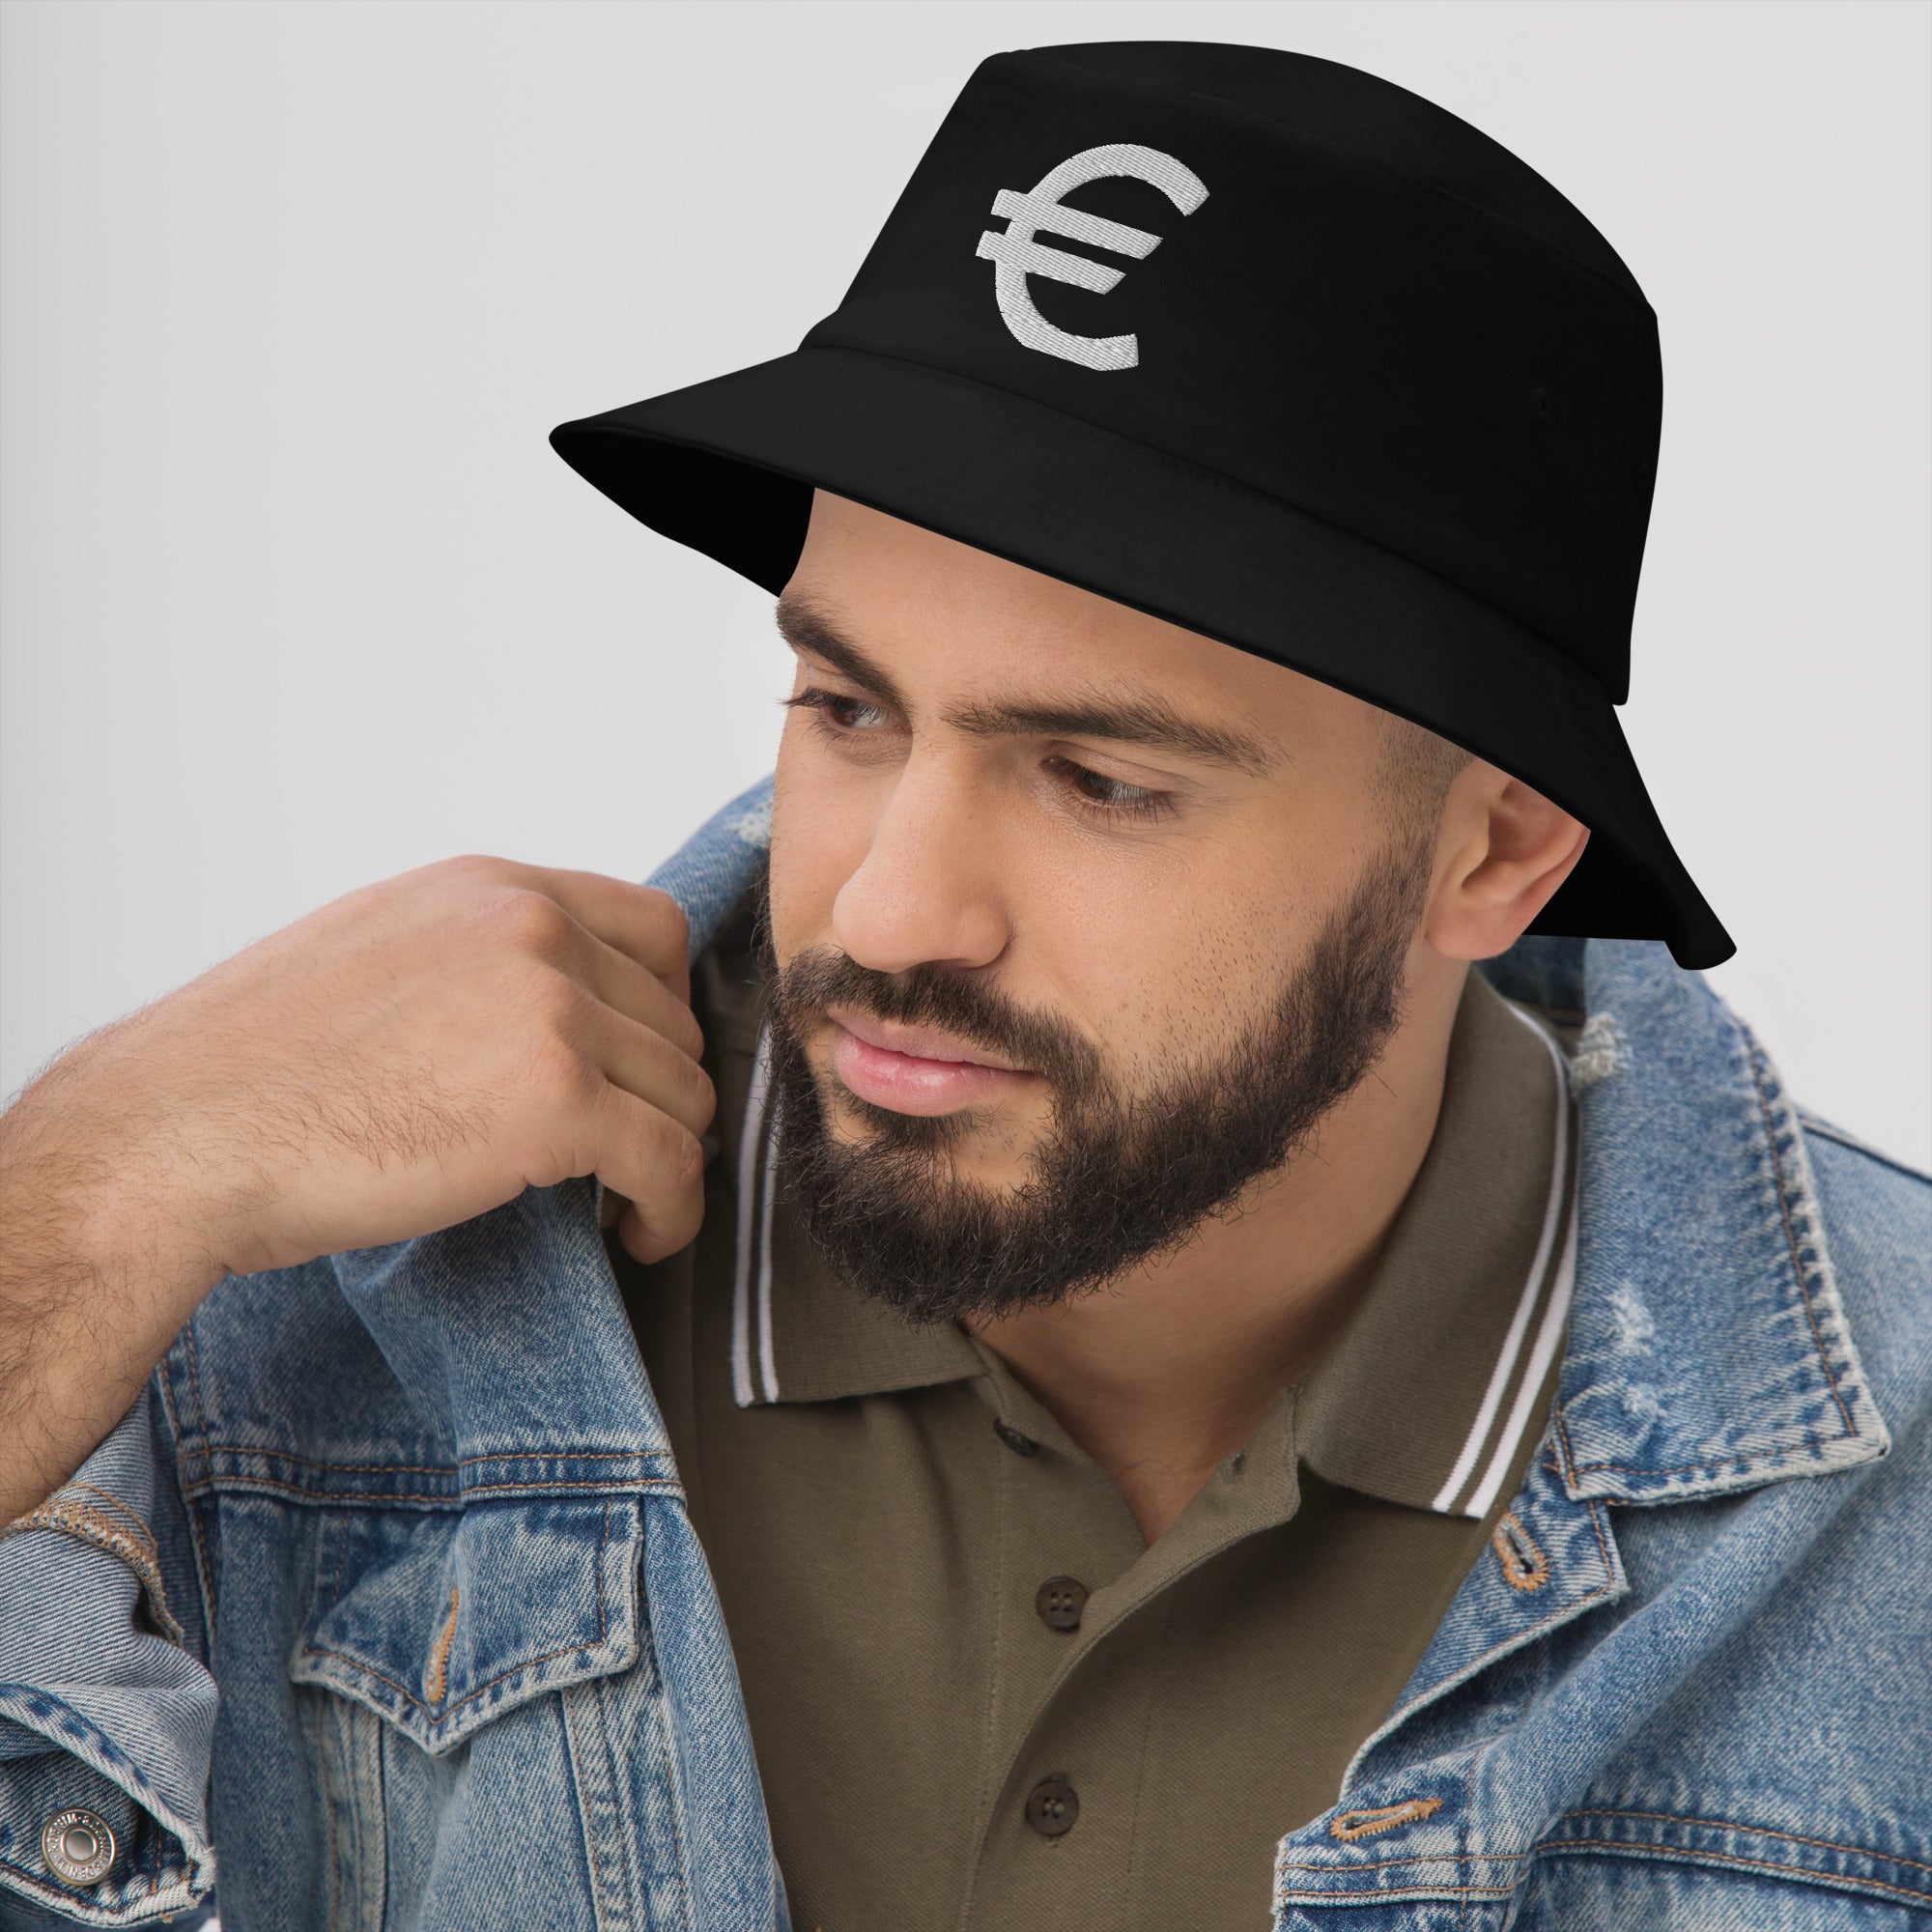 The Euro Currency Money Symbol of European Union Embroidered Bucket Hat